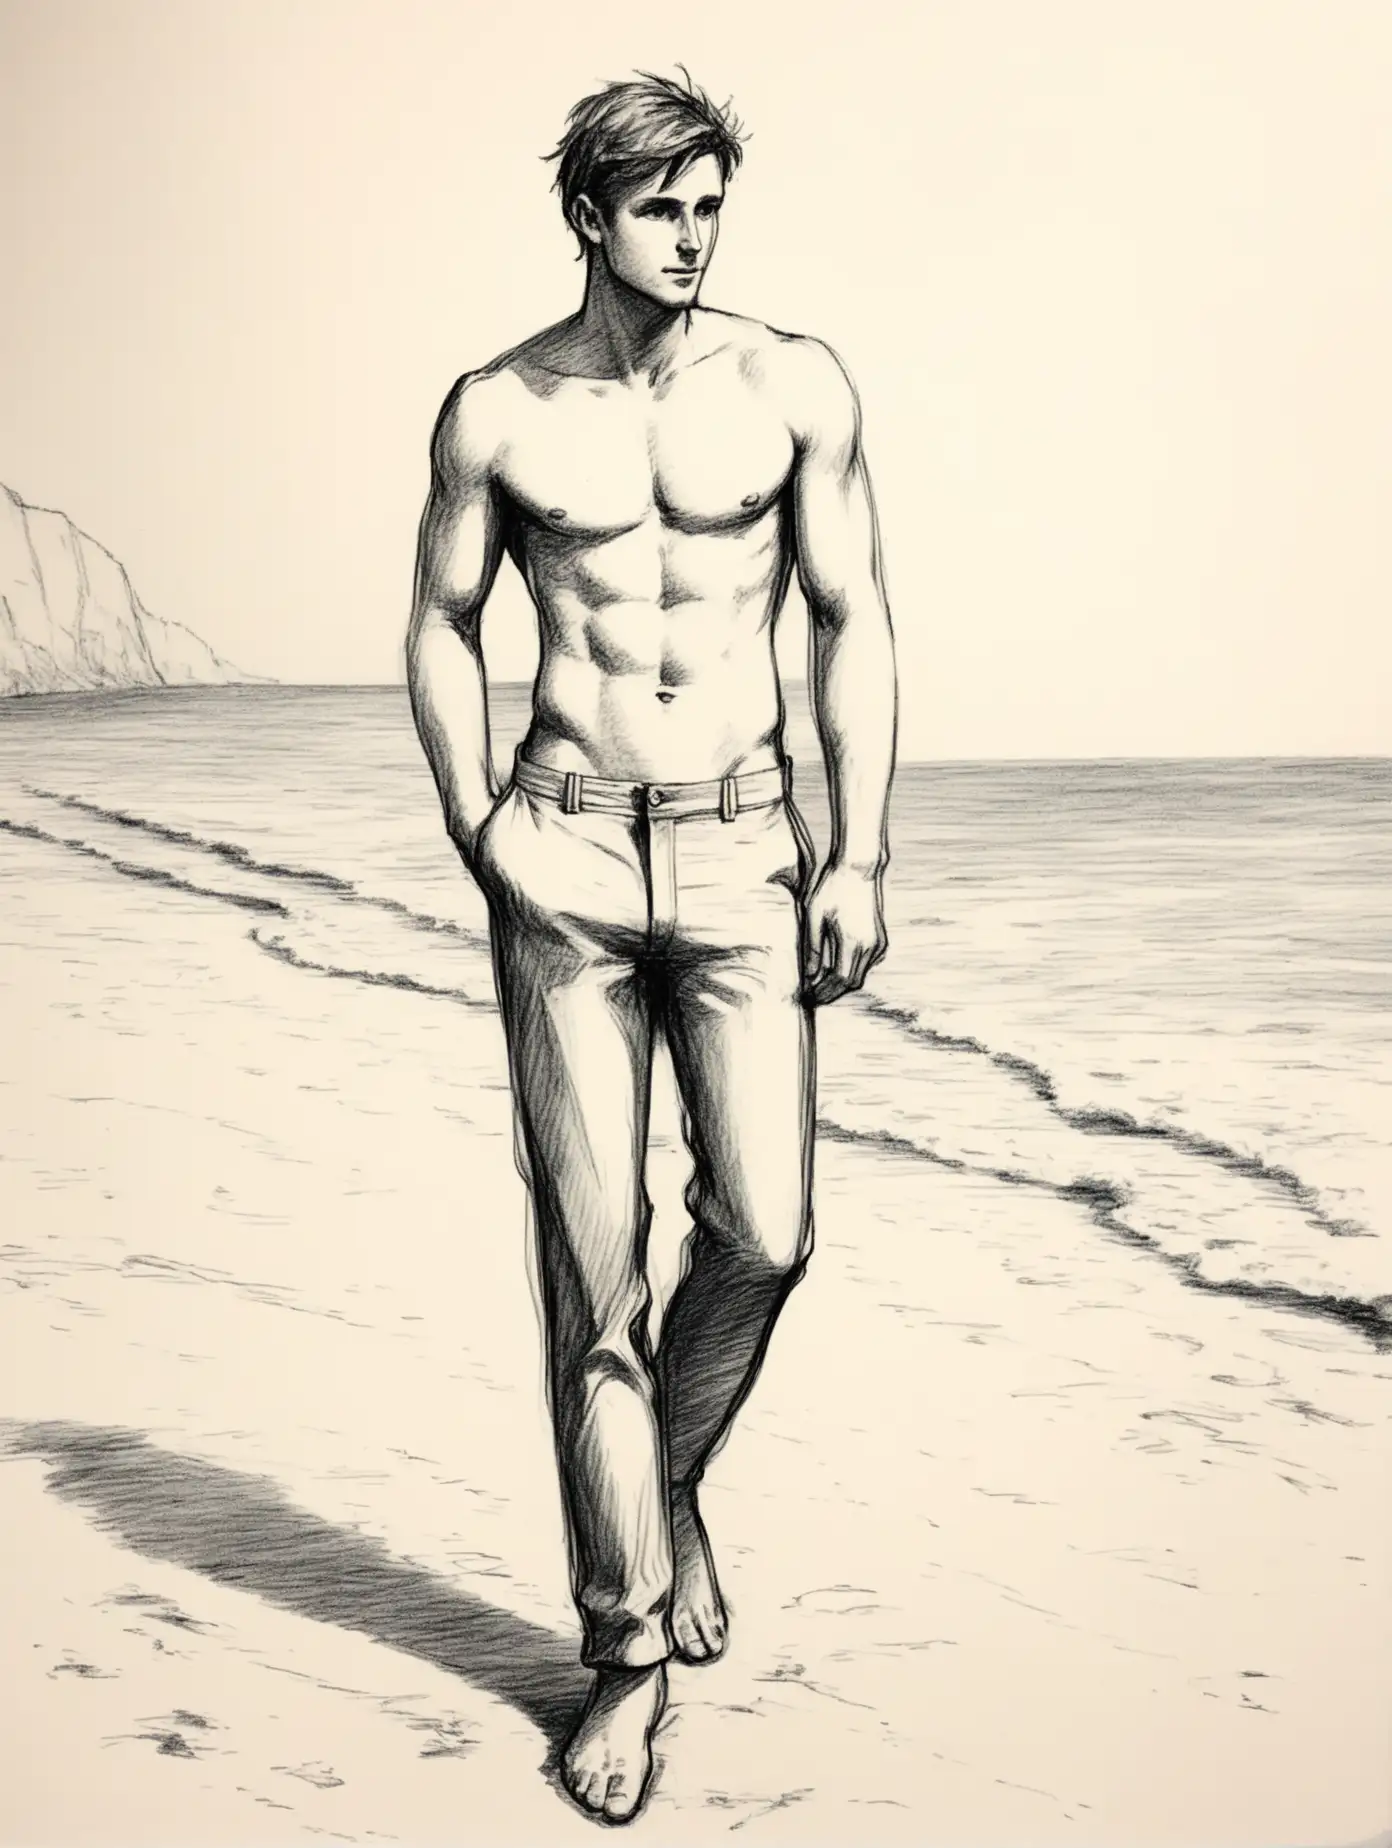 pencil sketch of a bare-chested European man wearing trousers standing looking at the sea on the beach